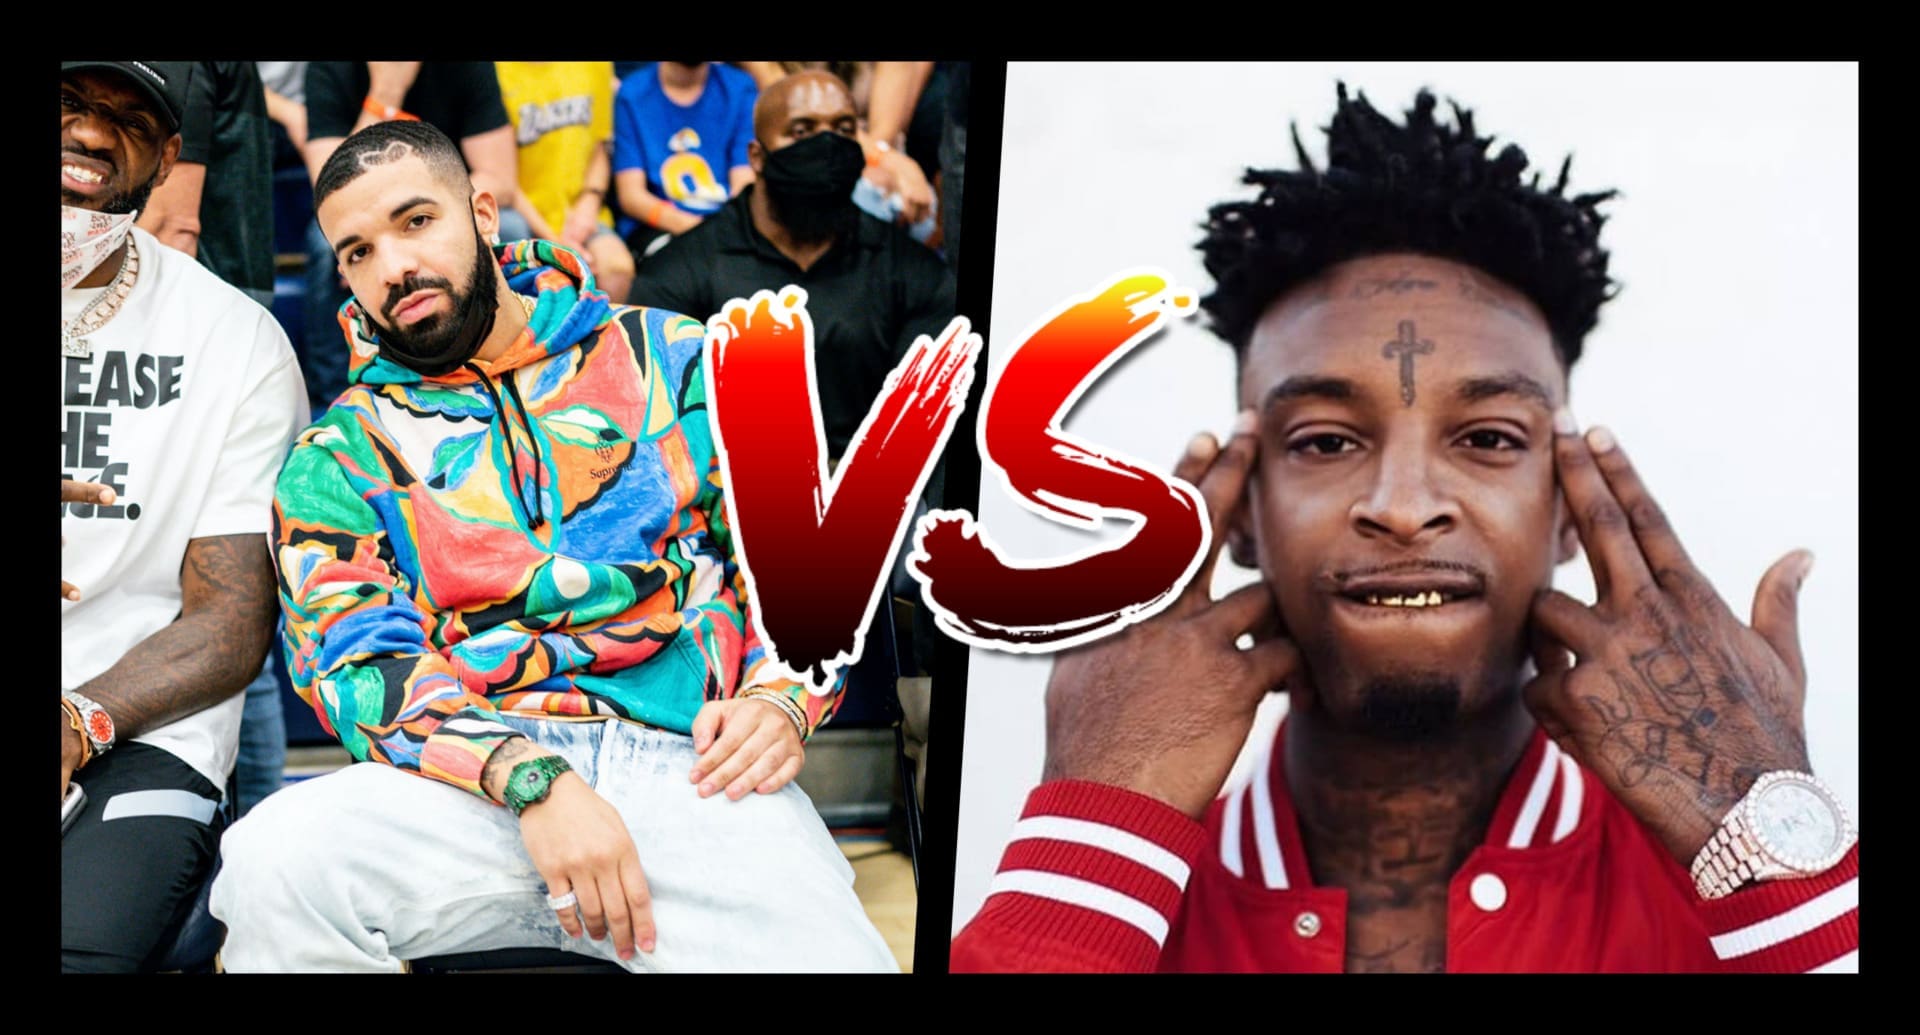 Rich Flex: Drake, 21 Savage - who has the better watch collection?